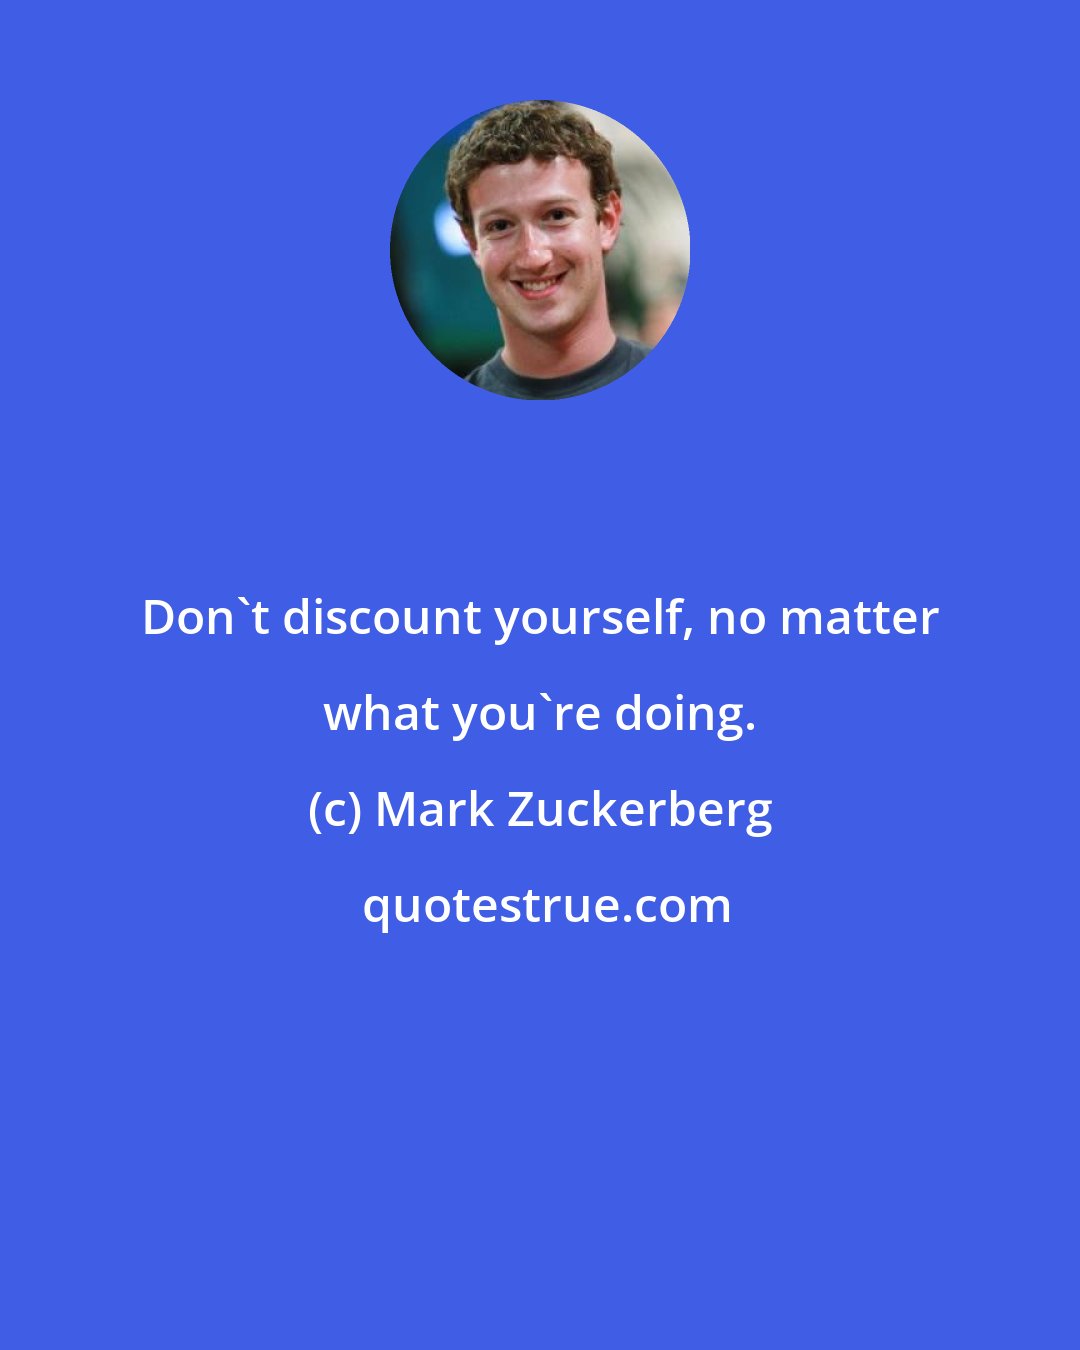 Mark Zuckerberg: Don't discount yourself, no matter what you're doing.